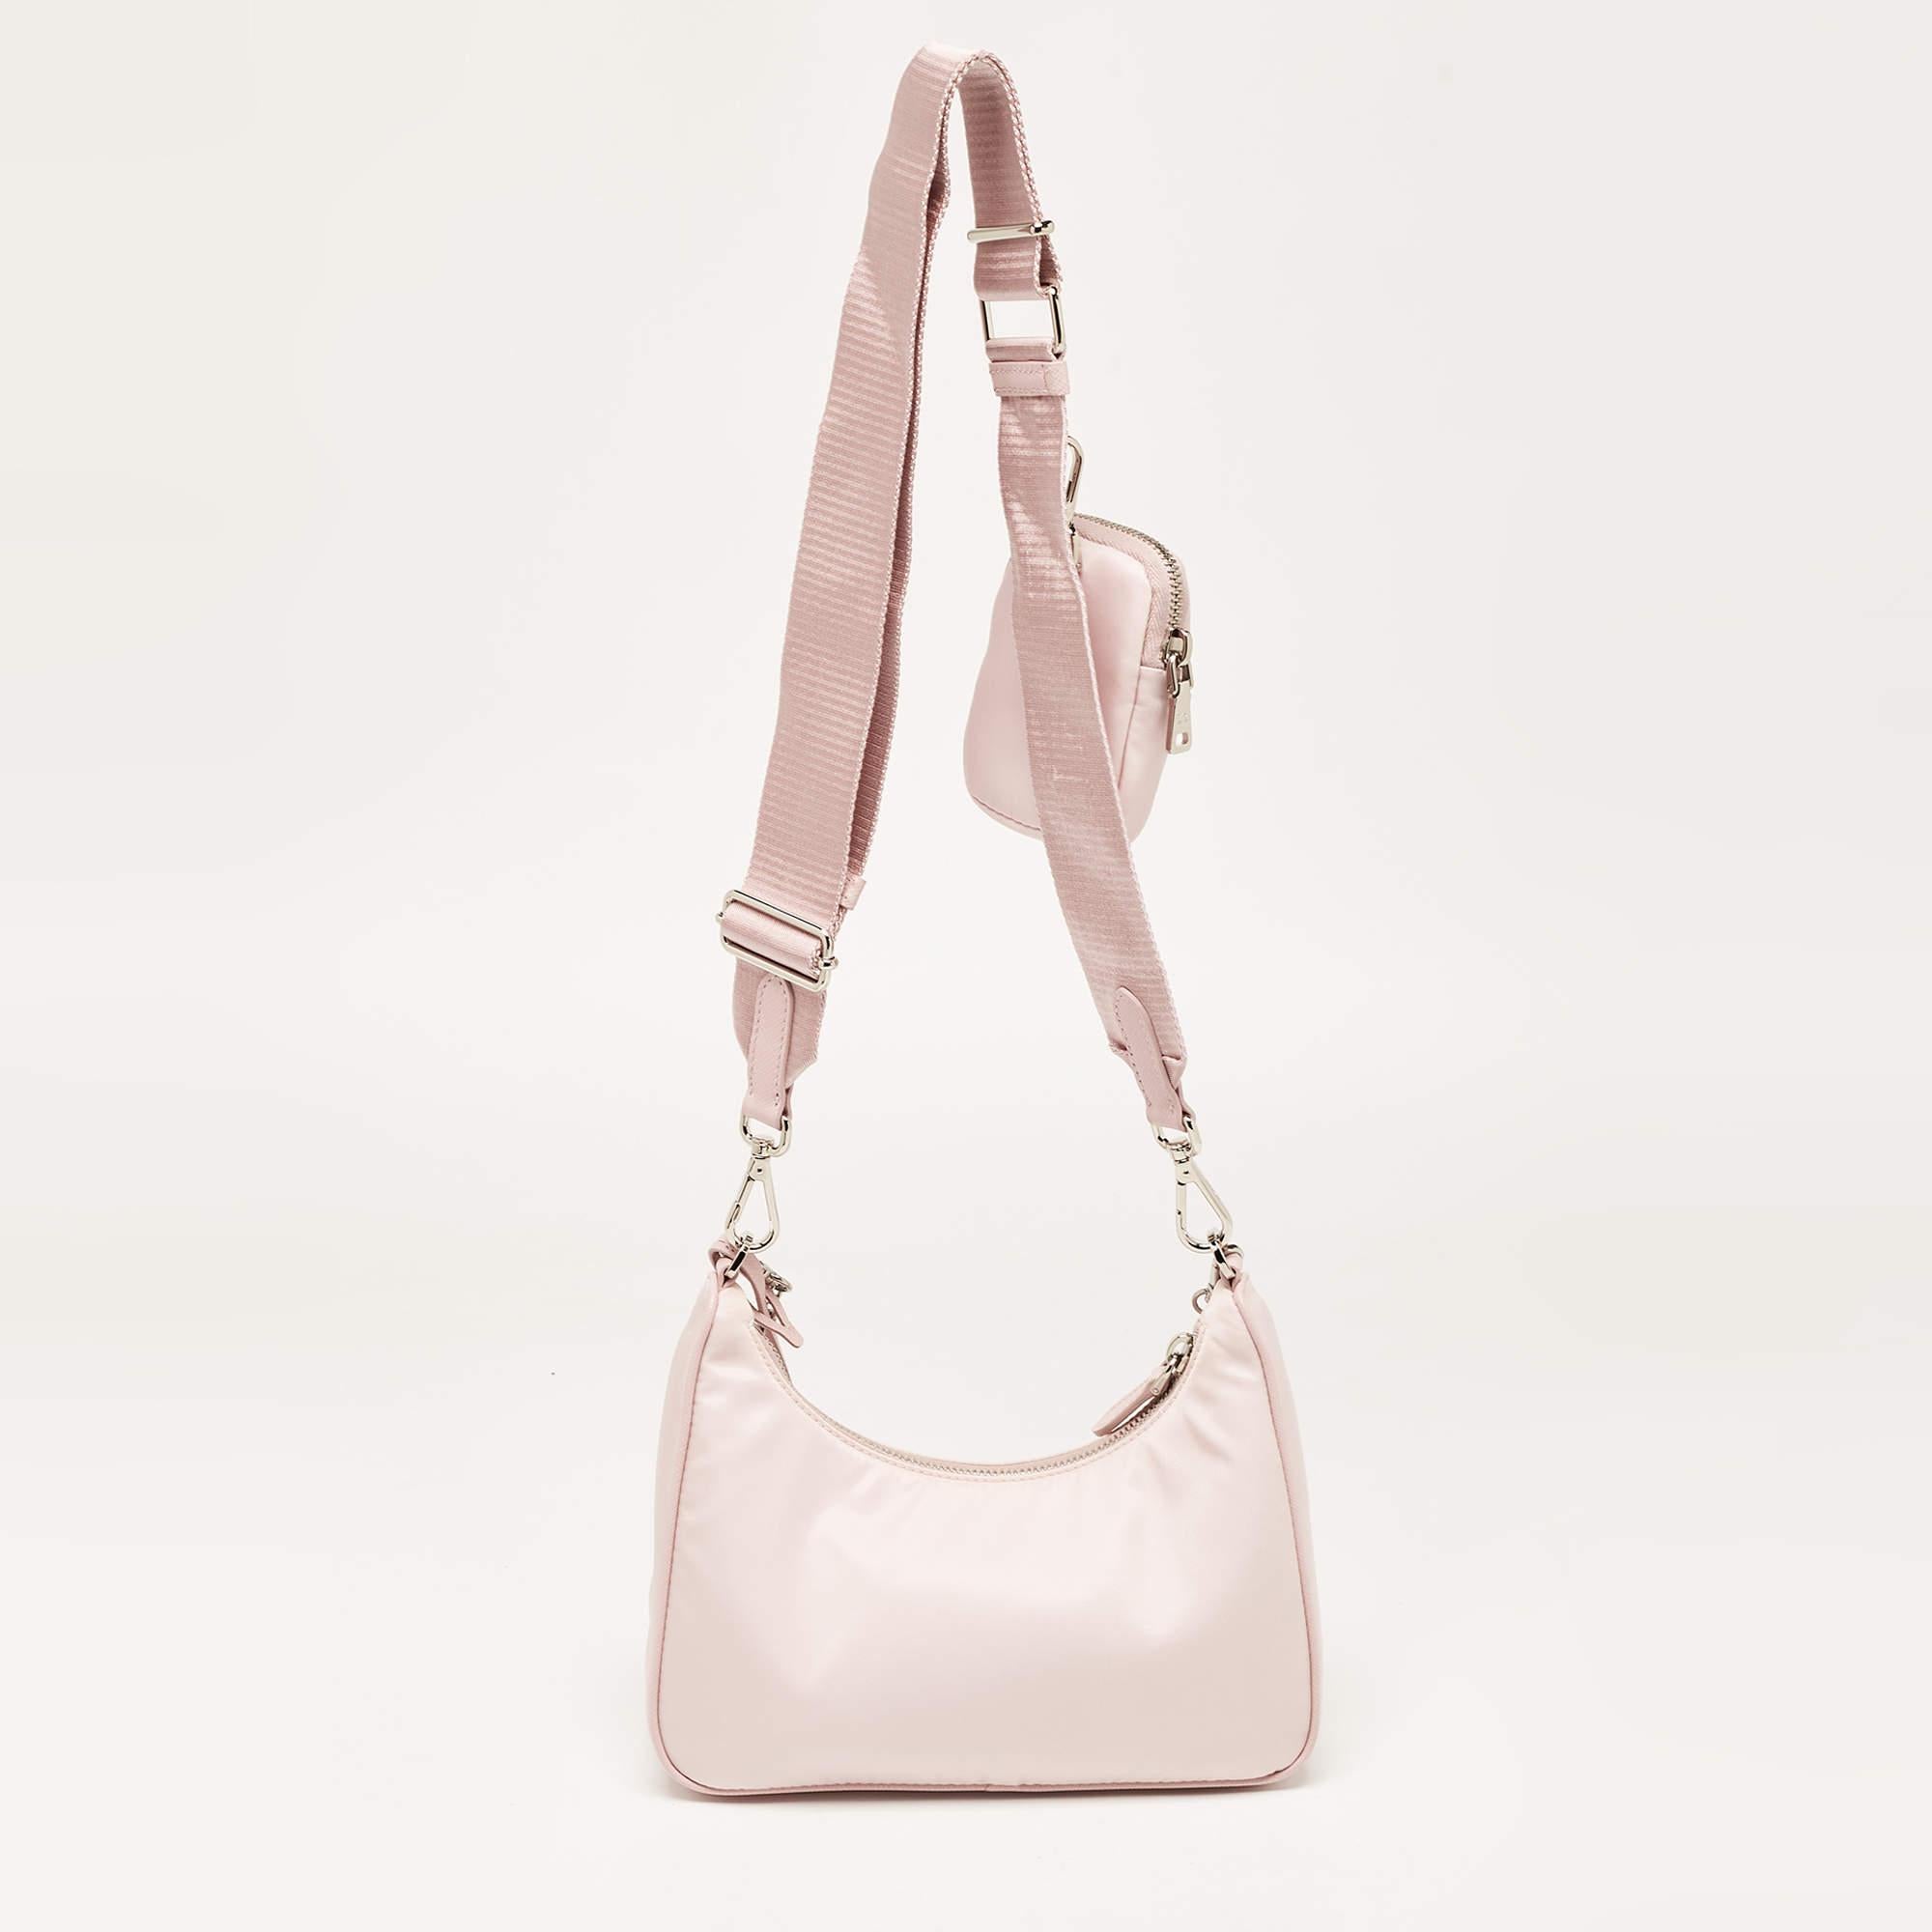 This Prada Re-Edition 2005 baguette bag is an example of the brand's fine designs that are skillfully crafted to project a classic charm. It is a functional creation with an elevating appeal.

Includes: Extra Pouch, Original Dustbag, Original Box,